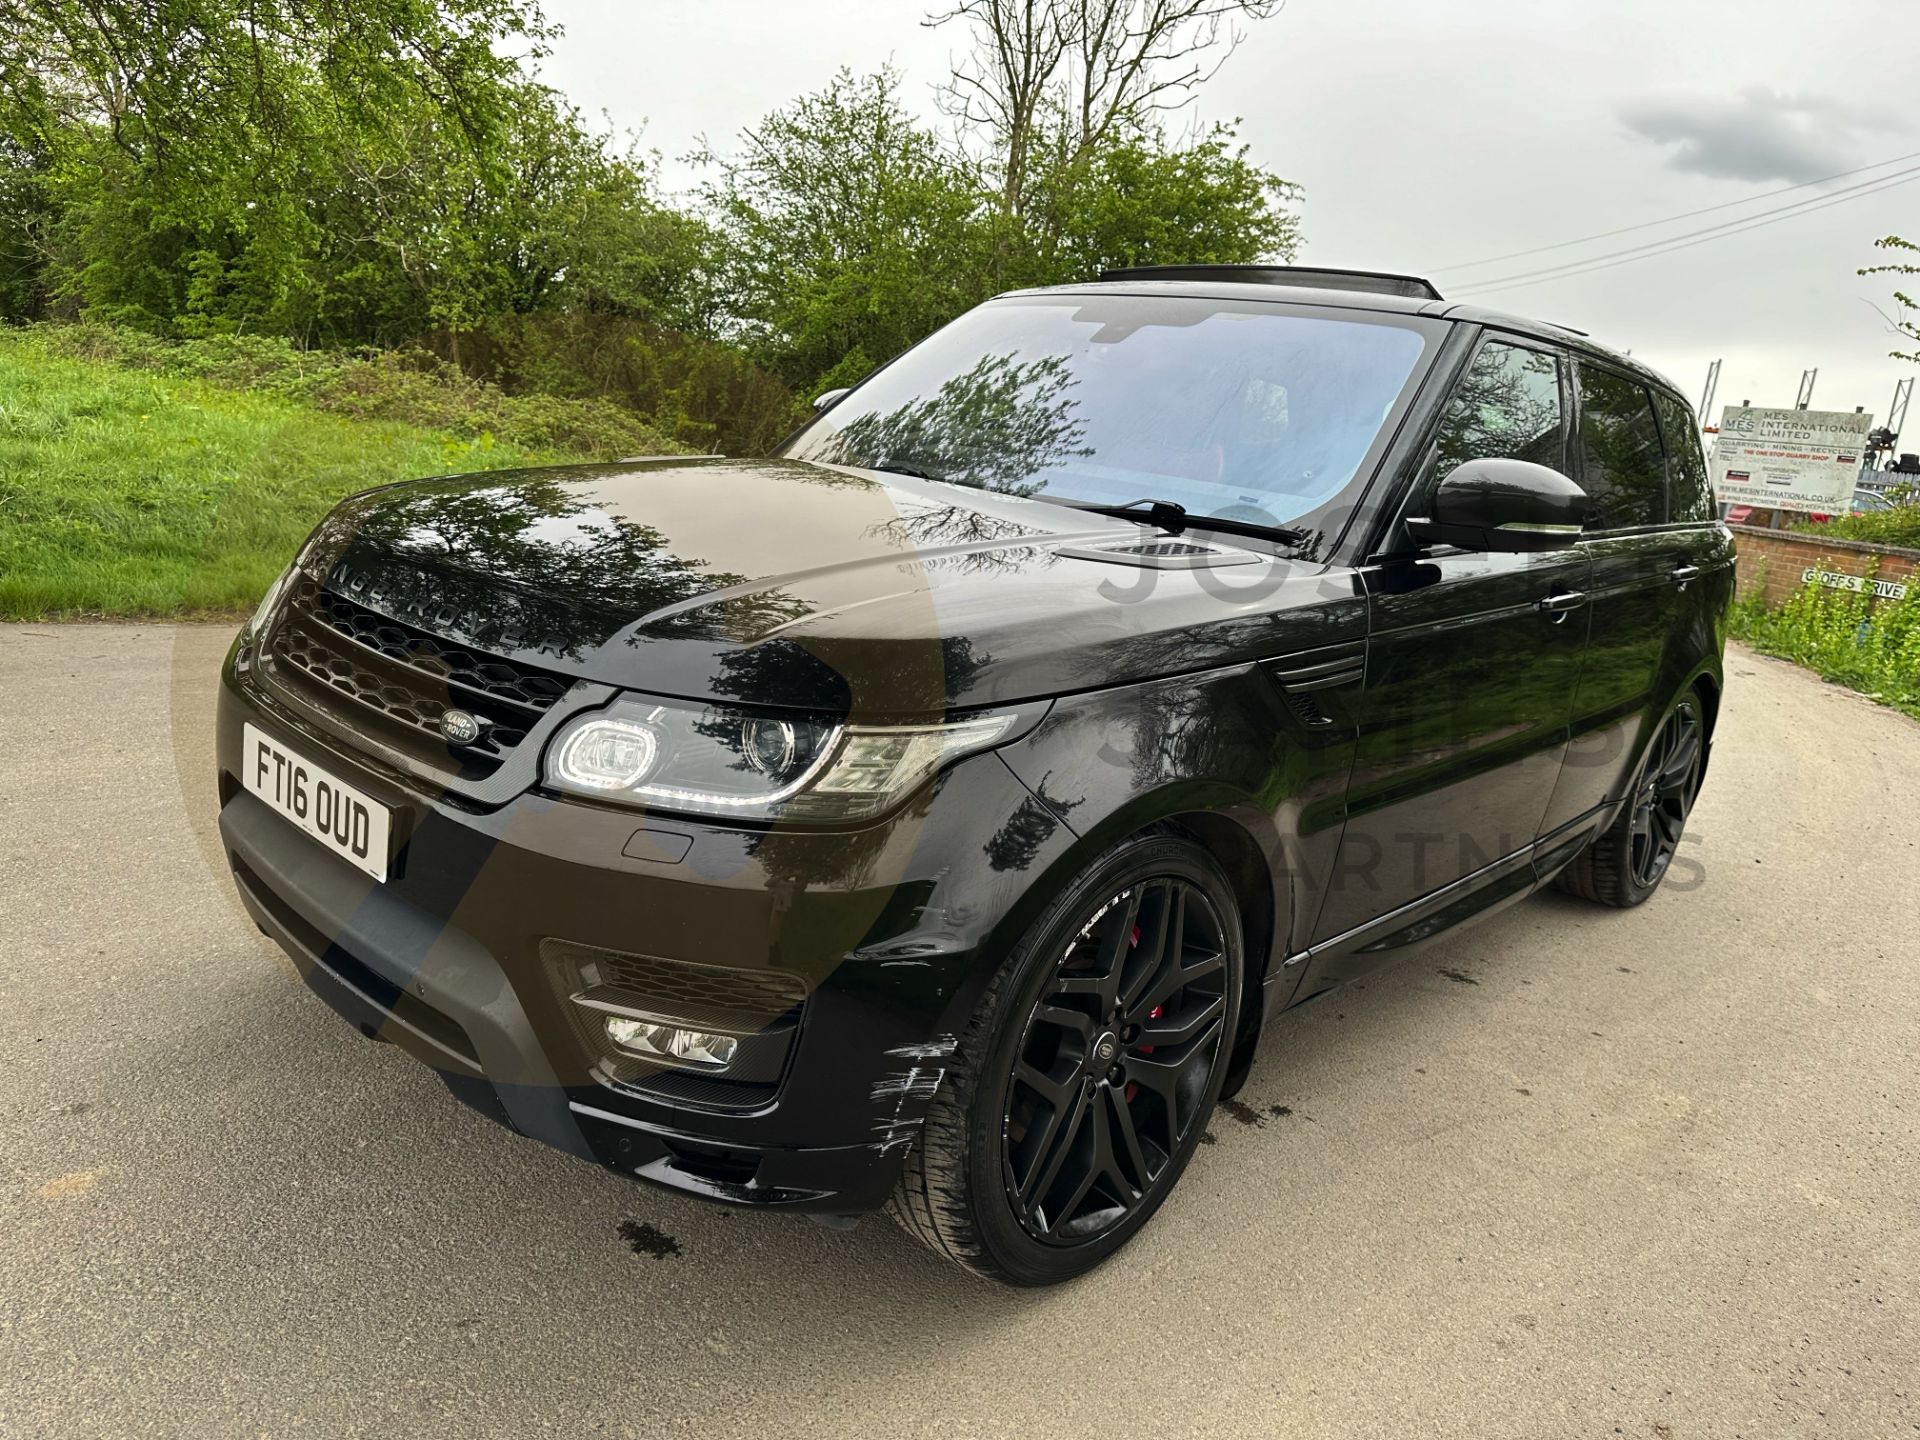 (ON SALE) RANGE ROVER SPORT *AUTOBIOGRAPHY DYNAMIC* SUV (2016 - EURO 6) 3.0 SDV6 - 8 SPEED AUTO - Image 5 of 61